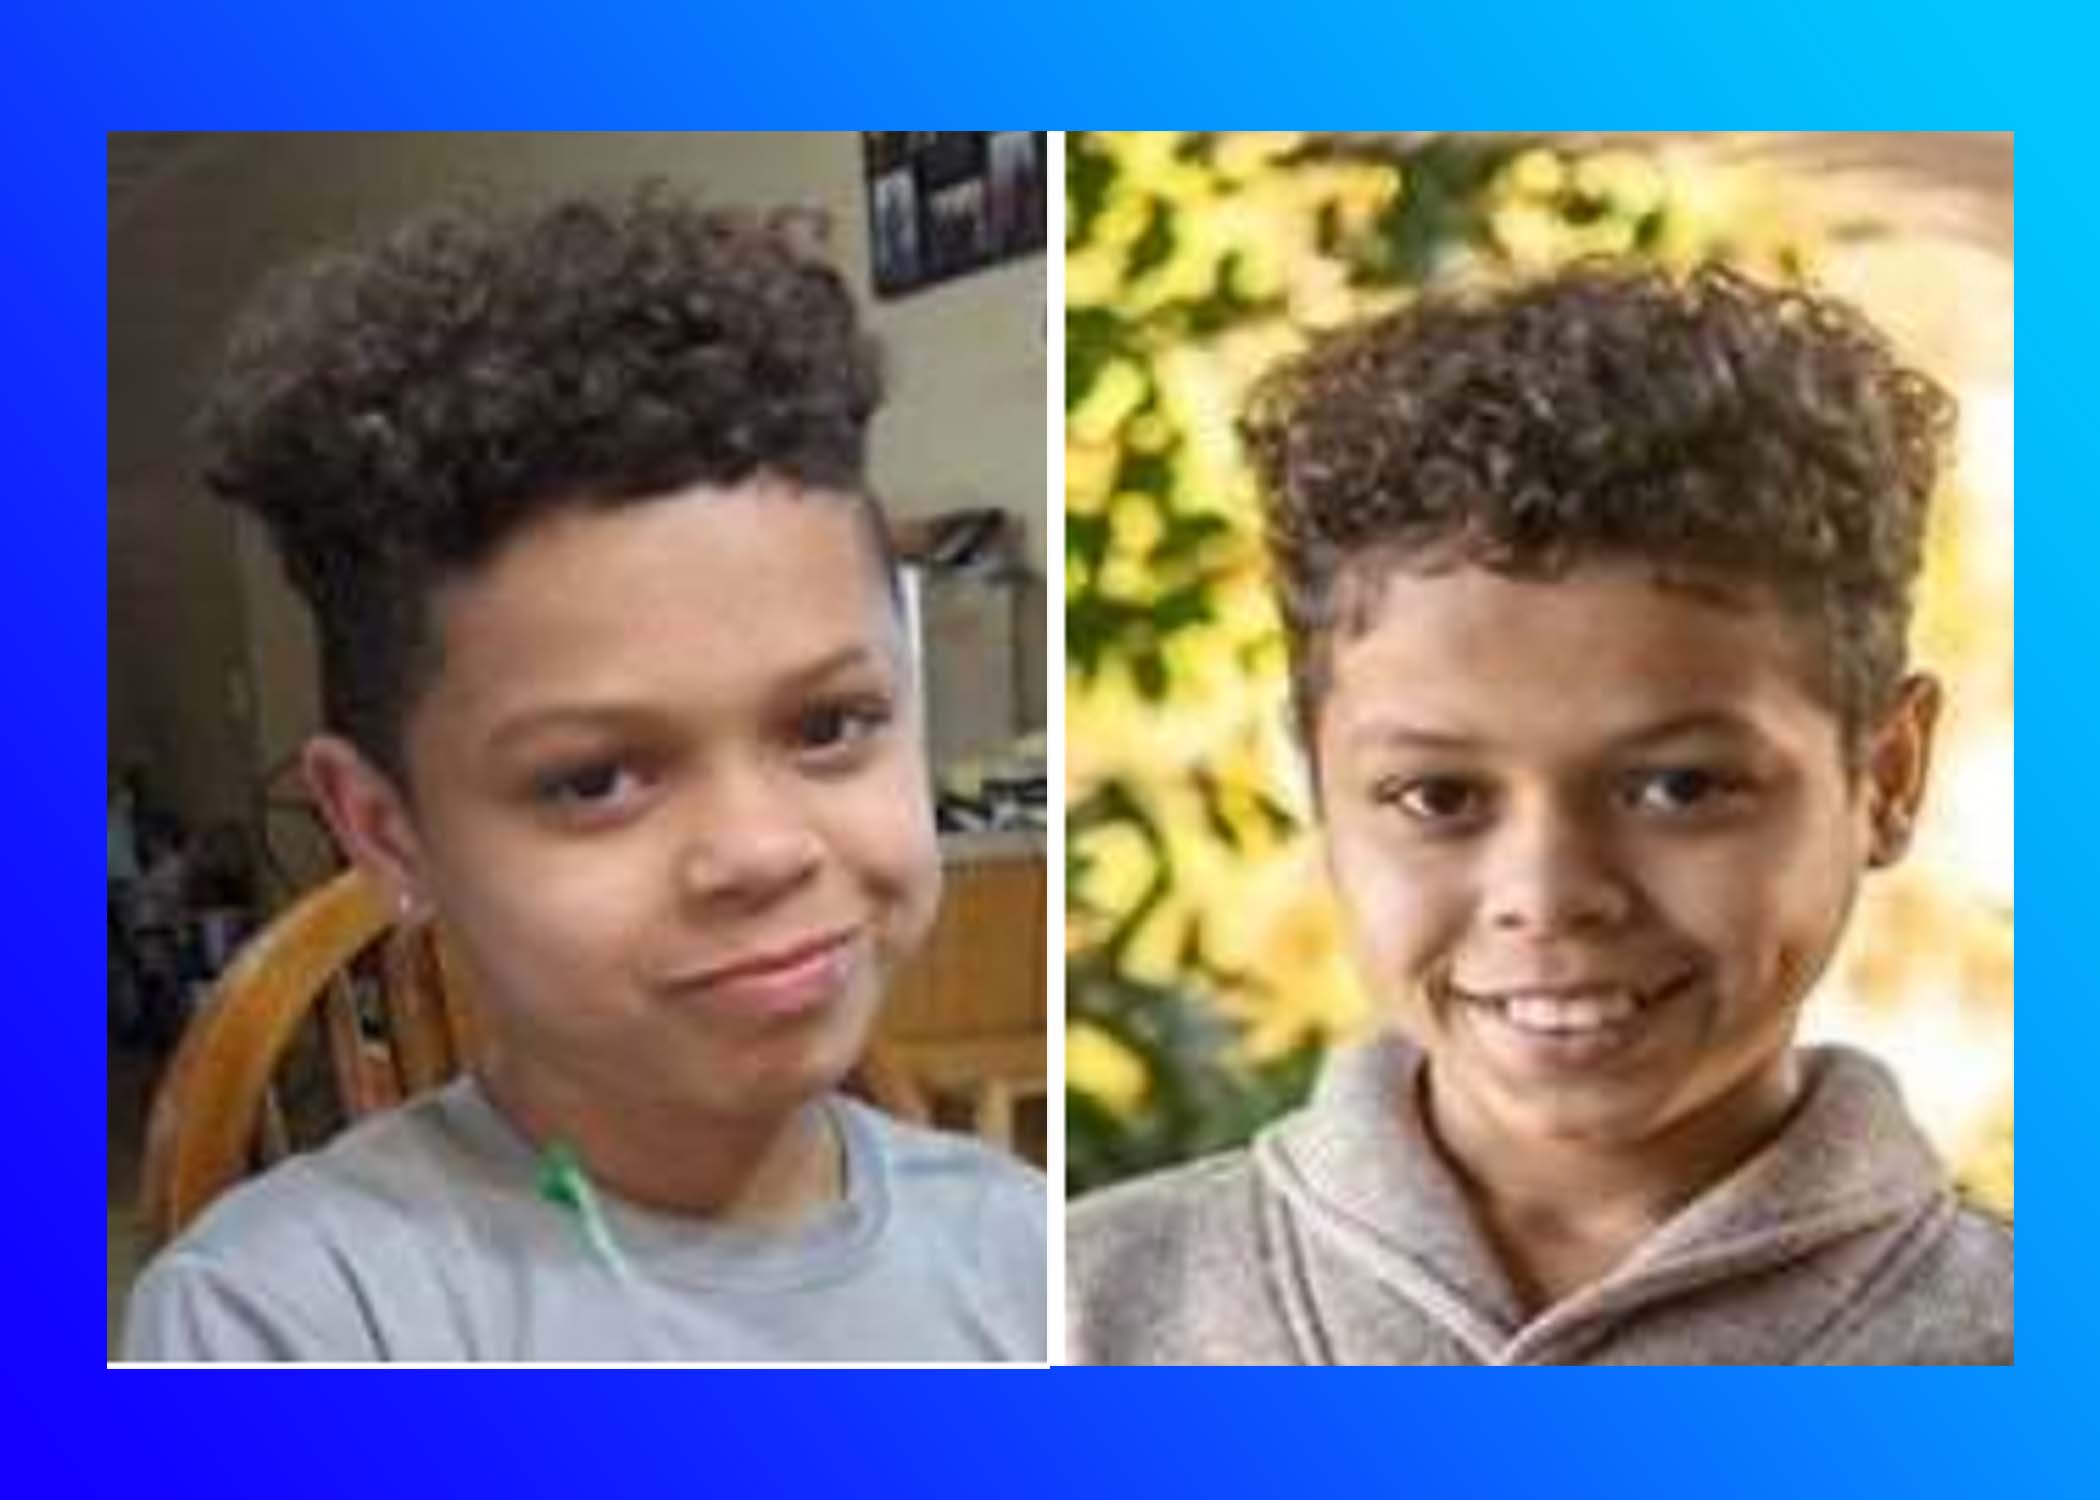 Emergency Missing Child Alert issued for Calhoun County 13-year-old